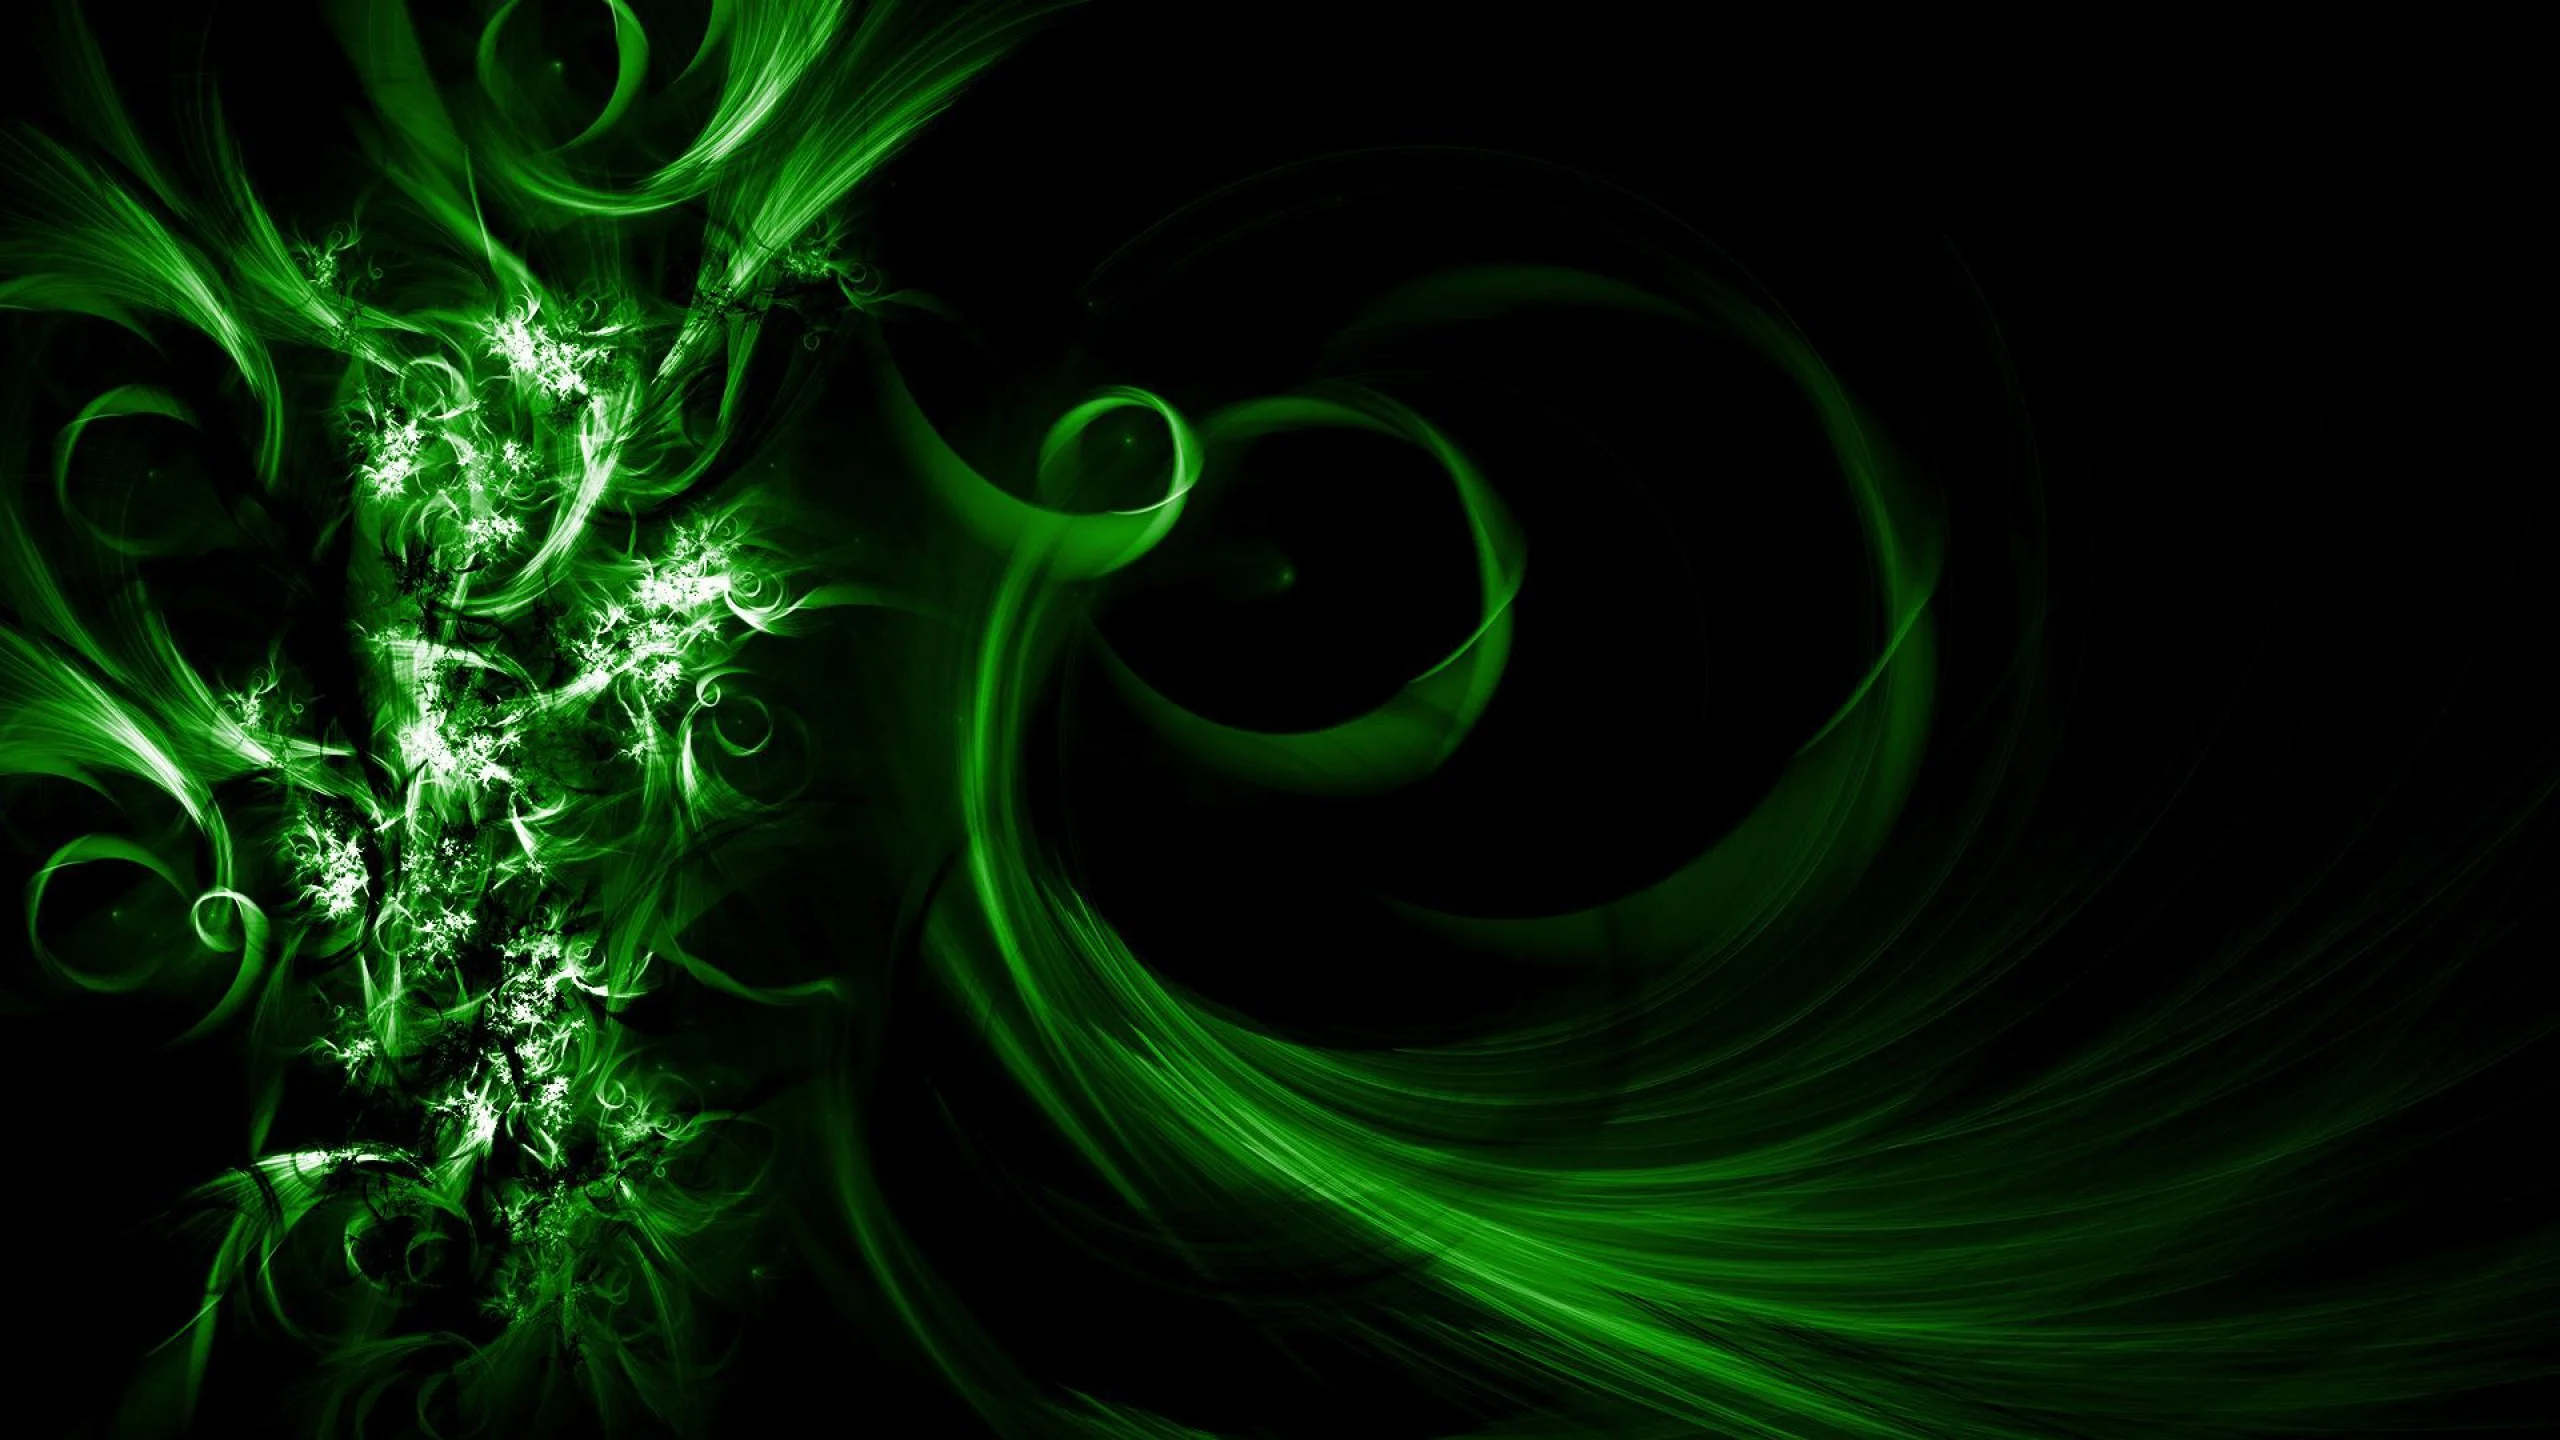 Cool Abstract Wallpaper with an Image of Dark Green Waves – HD Wallpapers  for Free